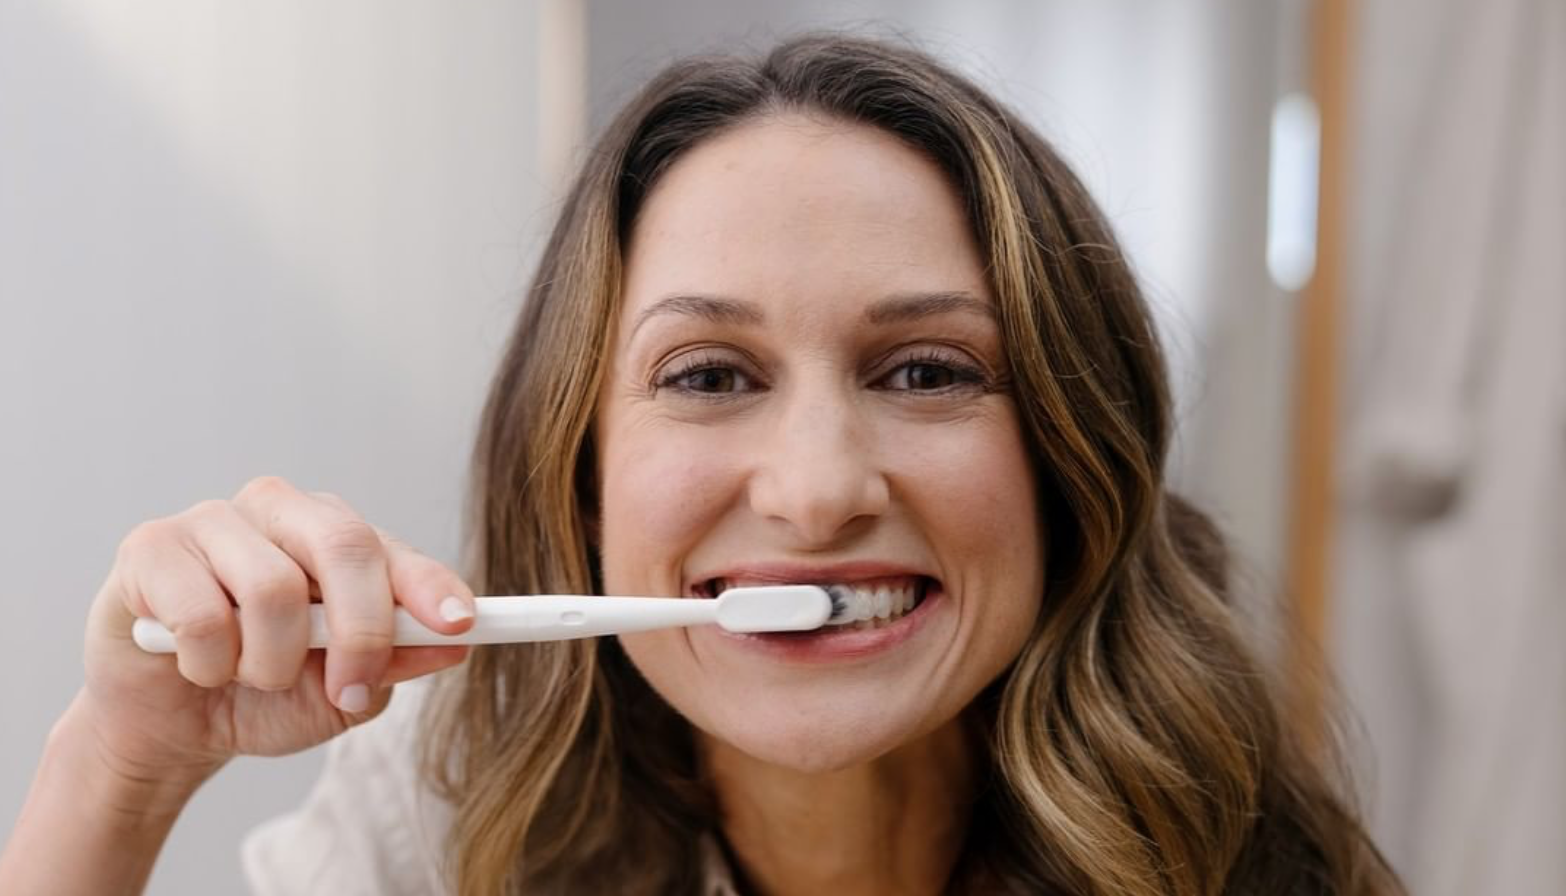 Dsmile launches Australia’s first sustainable environmentally kind dental kit Image